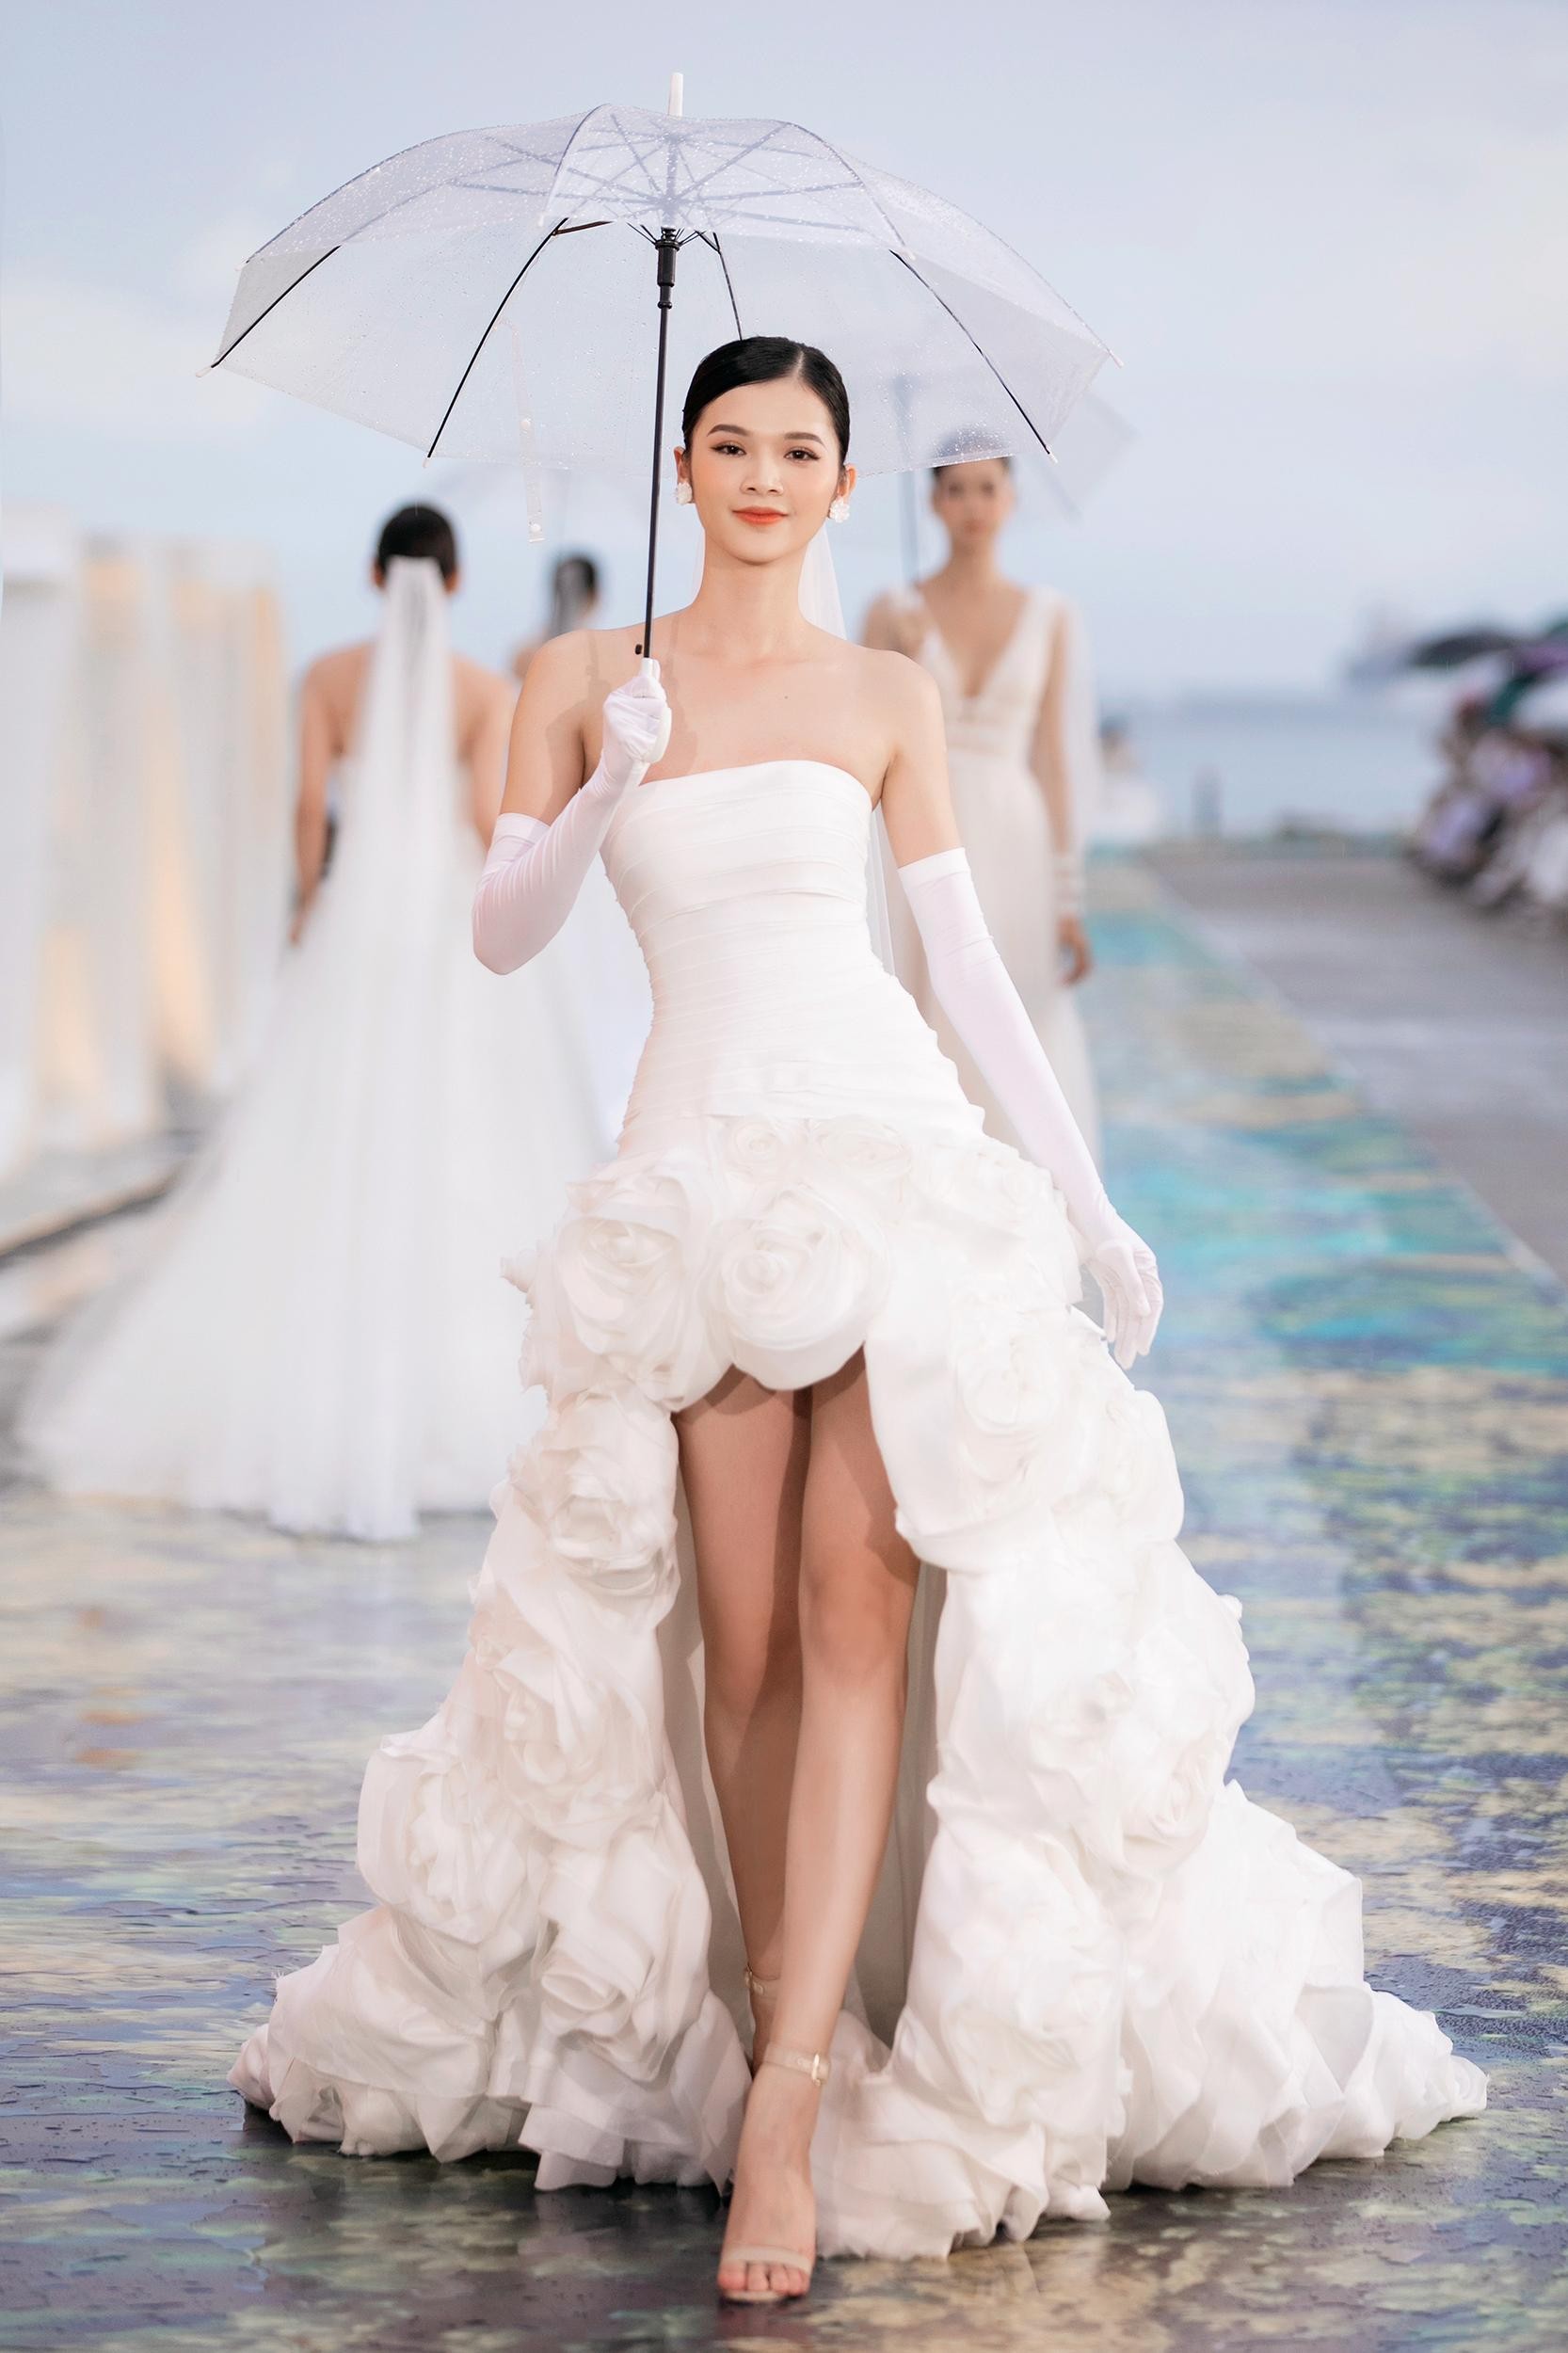 Miss Tieu Vy - Runner-up Phuong Anh transforms into a charming bride, competing in the catwalk in the rain - Photo 19.